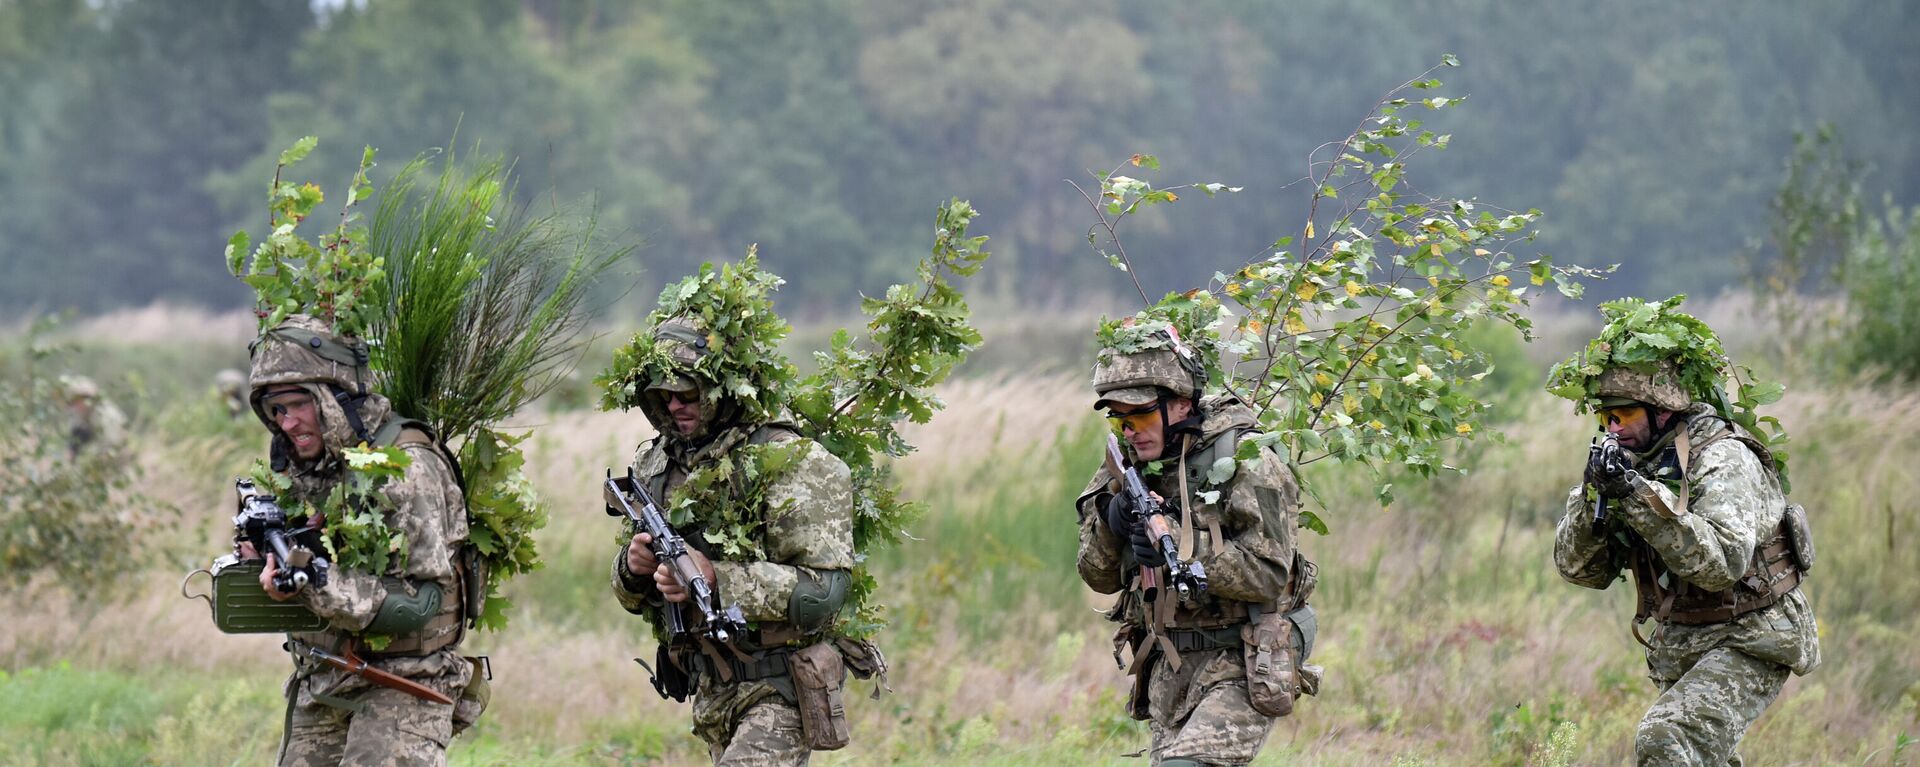 Soldiers take part in an exercise at the Yavoriv military training ground, close to Lvov, Western Ukraine, Friday, Sept 24, 2021. Ukraine, the US, and other NATO countries continue joint military drills in Western Ukraine presenting offensive exercises in town-like surroundings with tanks and other military vehicles involved.  - Sputnik International, 1920, 20.10.2021